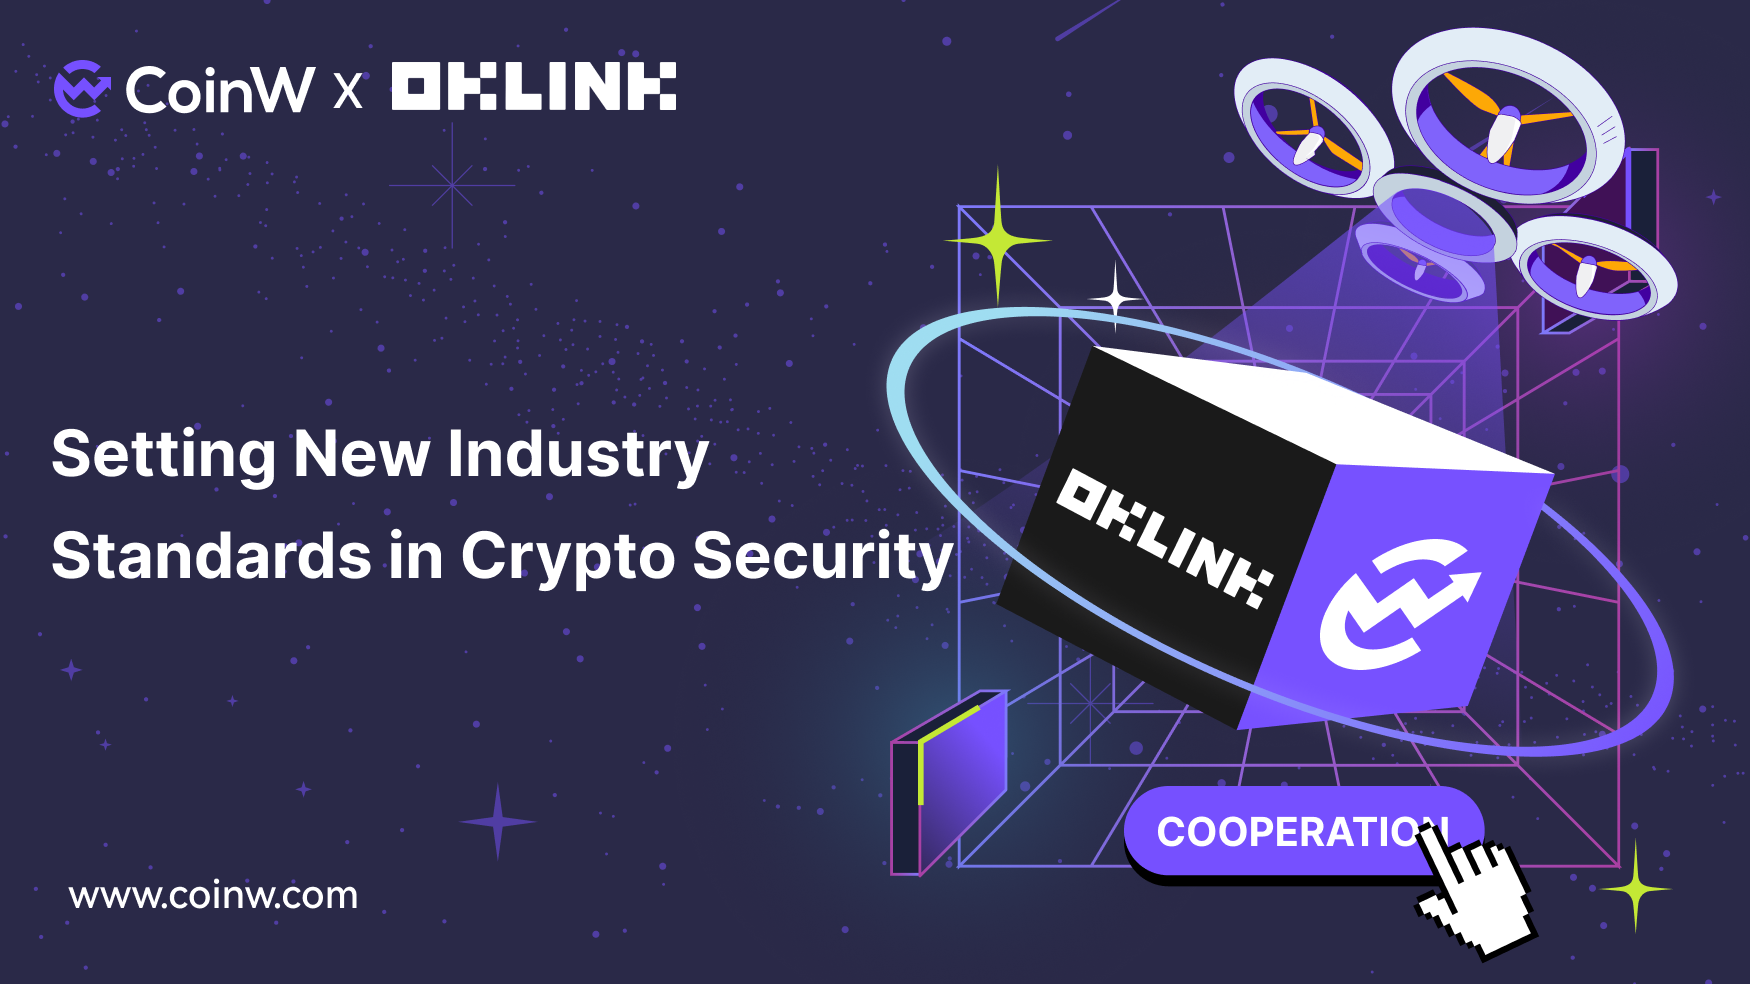 , CoinW and OKLink Forge Strategic Partnership to Set New Industry Standards in Crypto Security